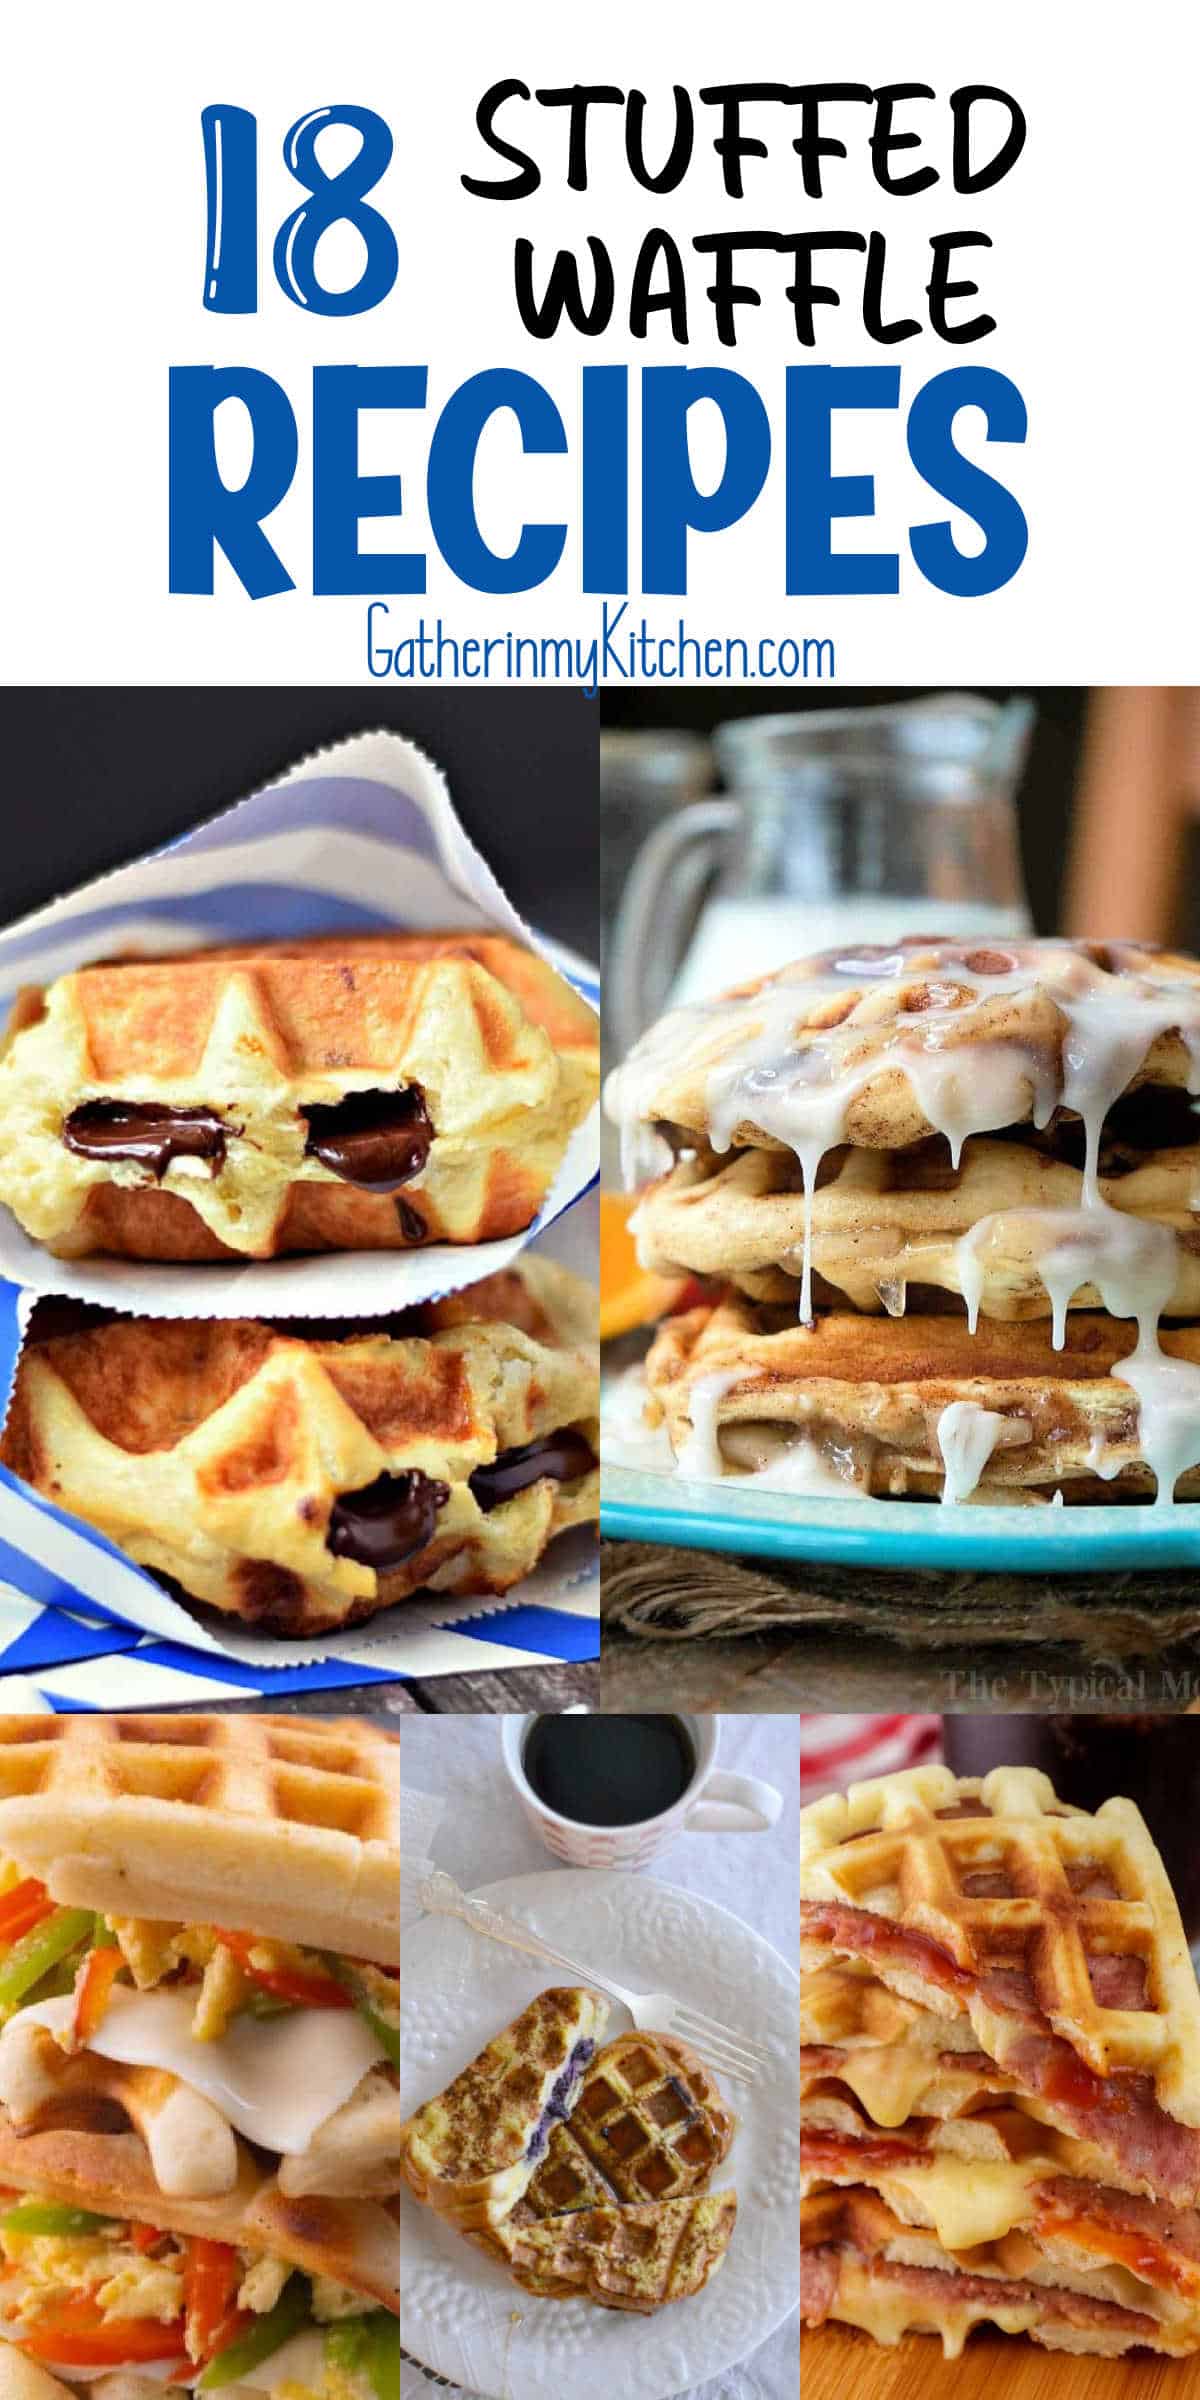 Pin image: top says "18 stuffed waffle recipes" and bottom has a collage of 5 stuffed waffles.